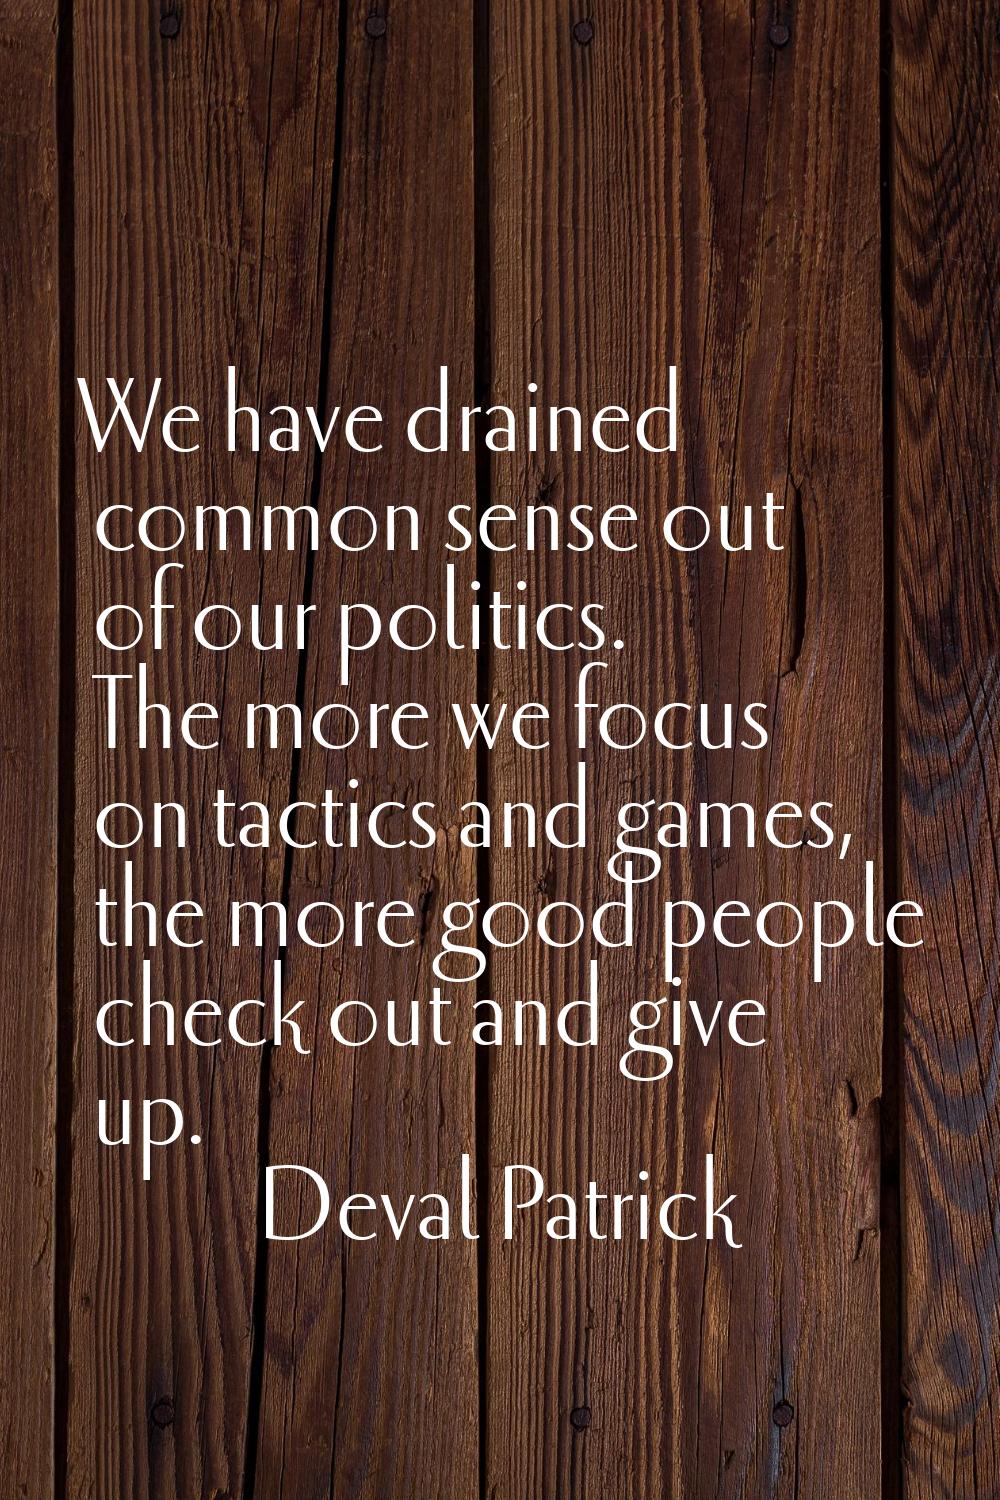 We have drained common sense out of our politics. The more we focus on tactics and games, the more 